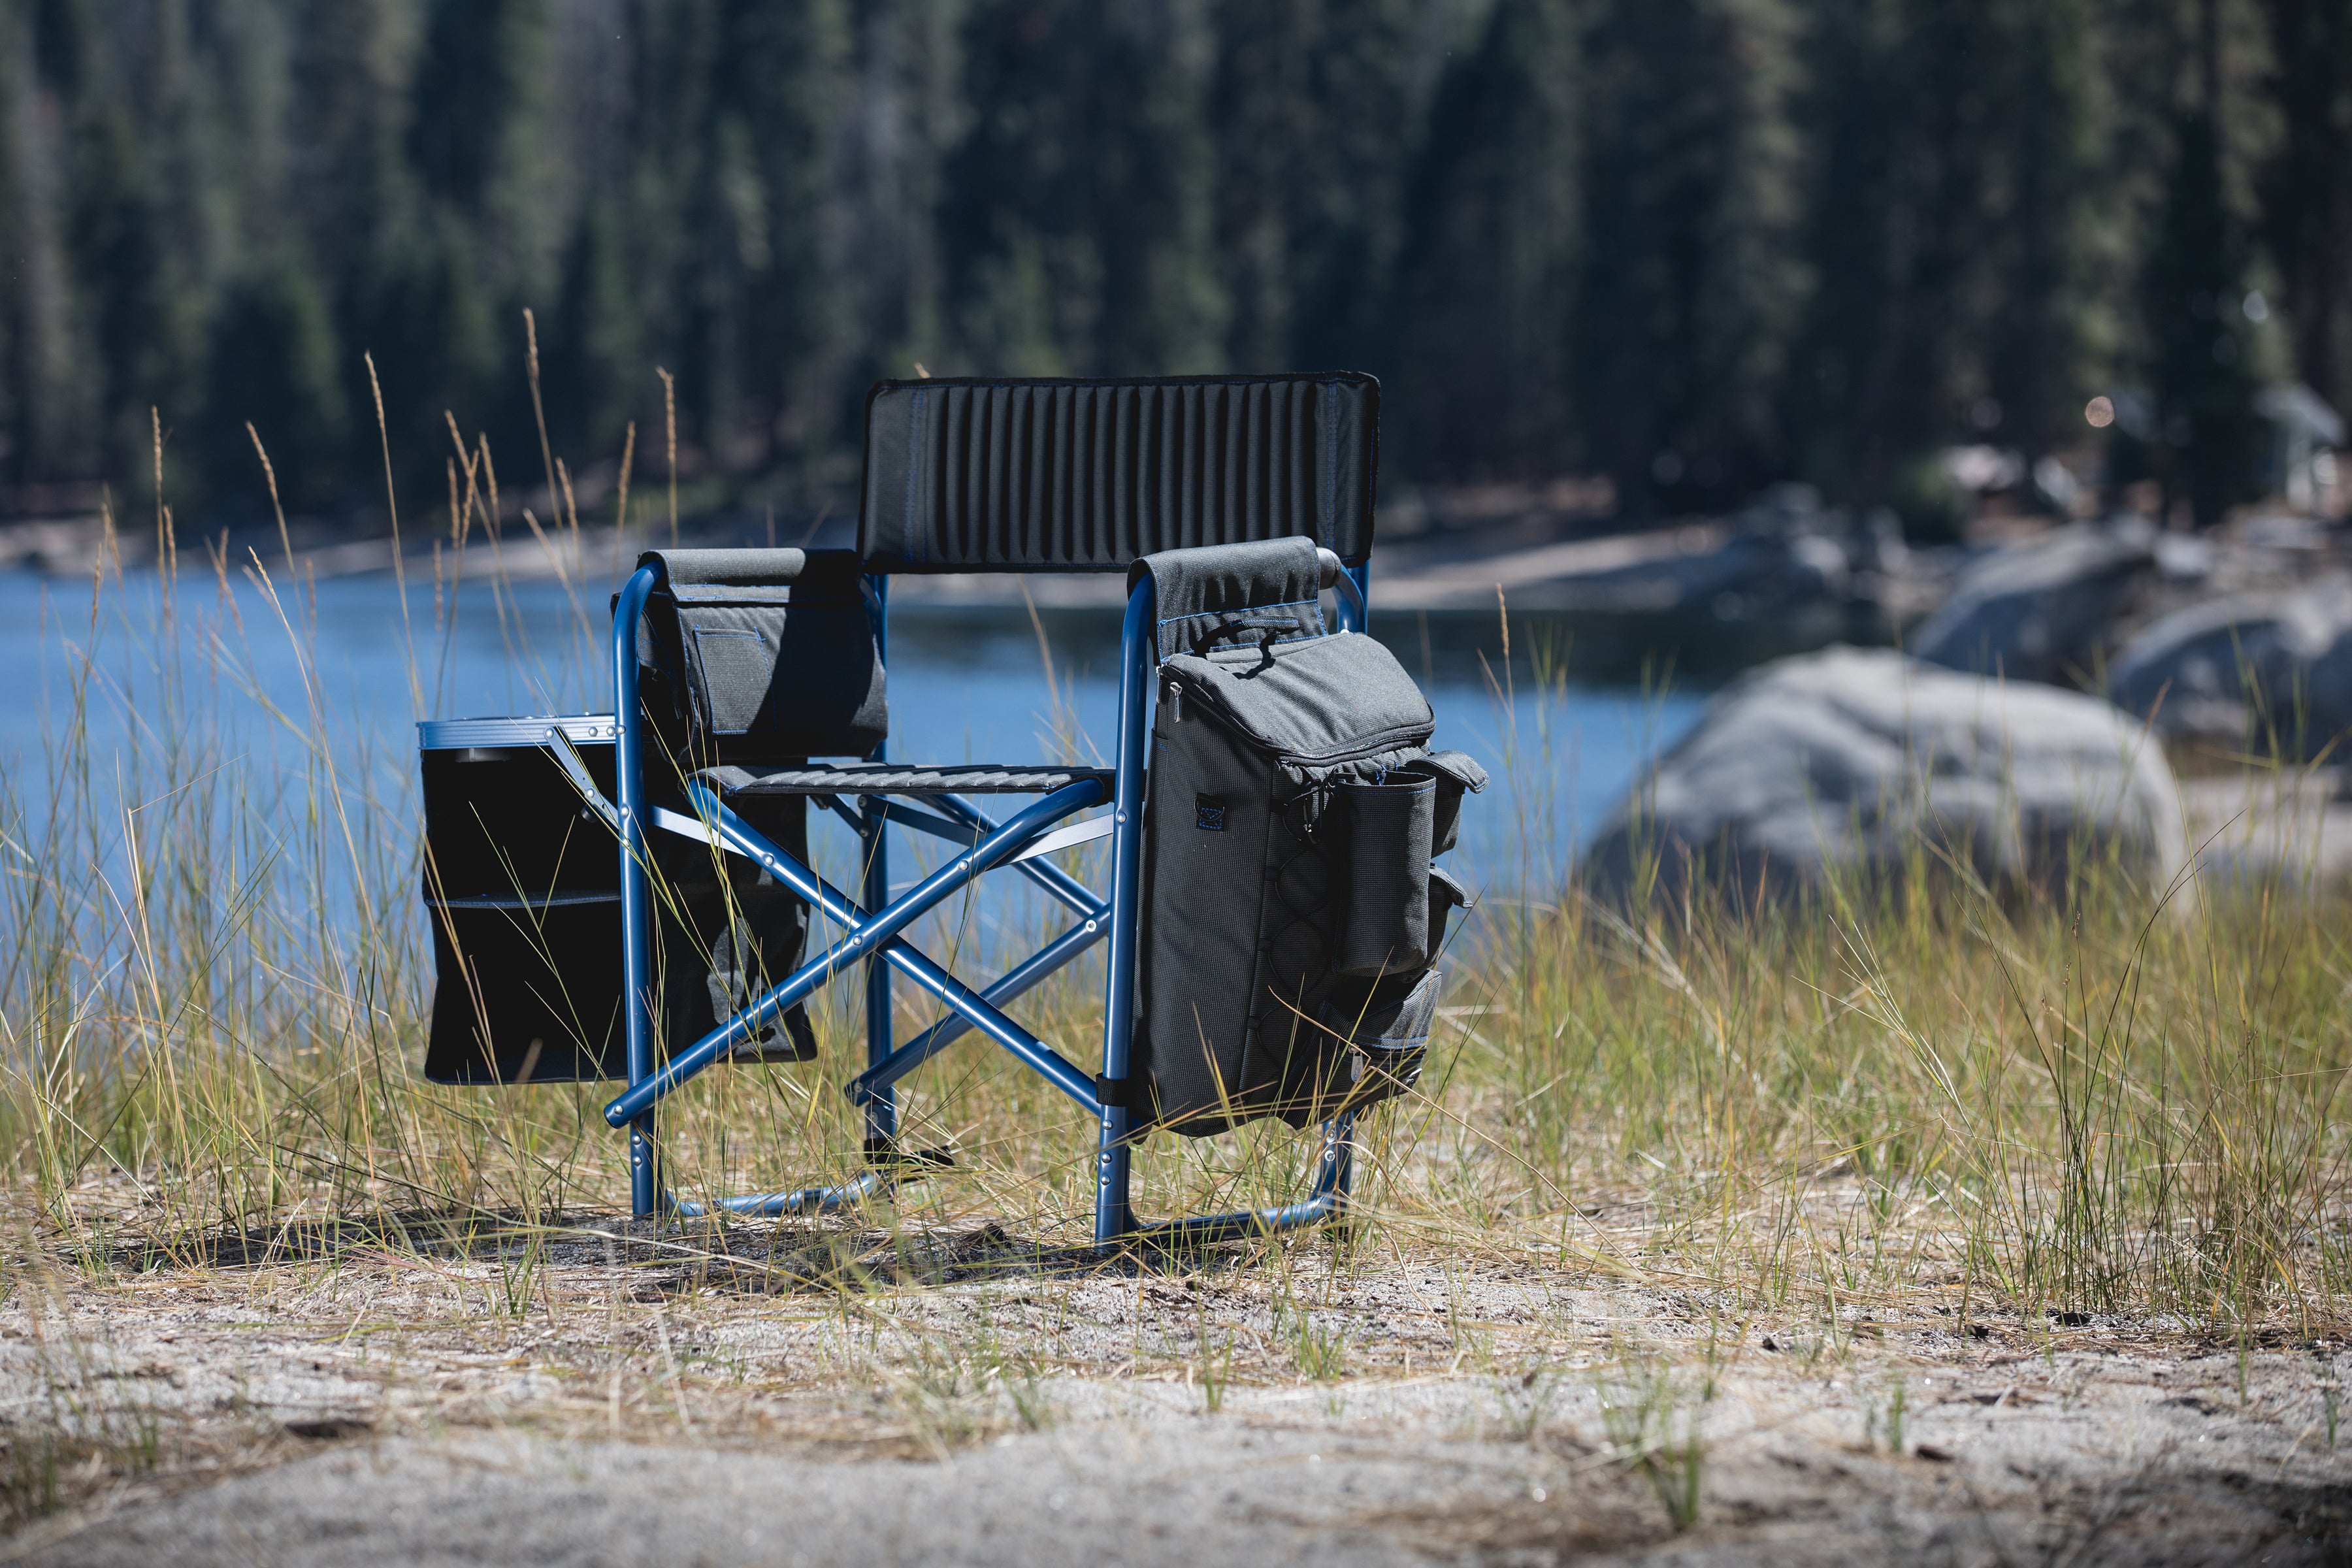 Michigan Wolverines - Fusion Camping Chair